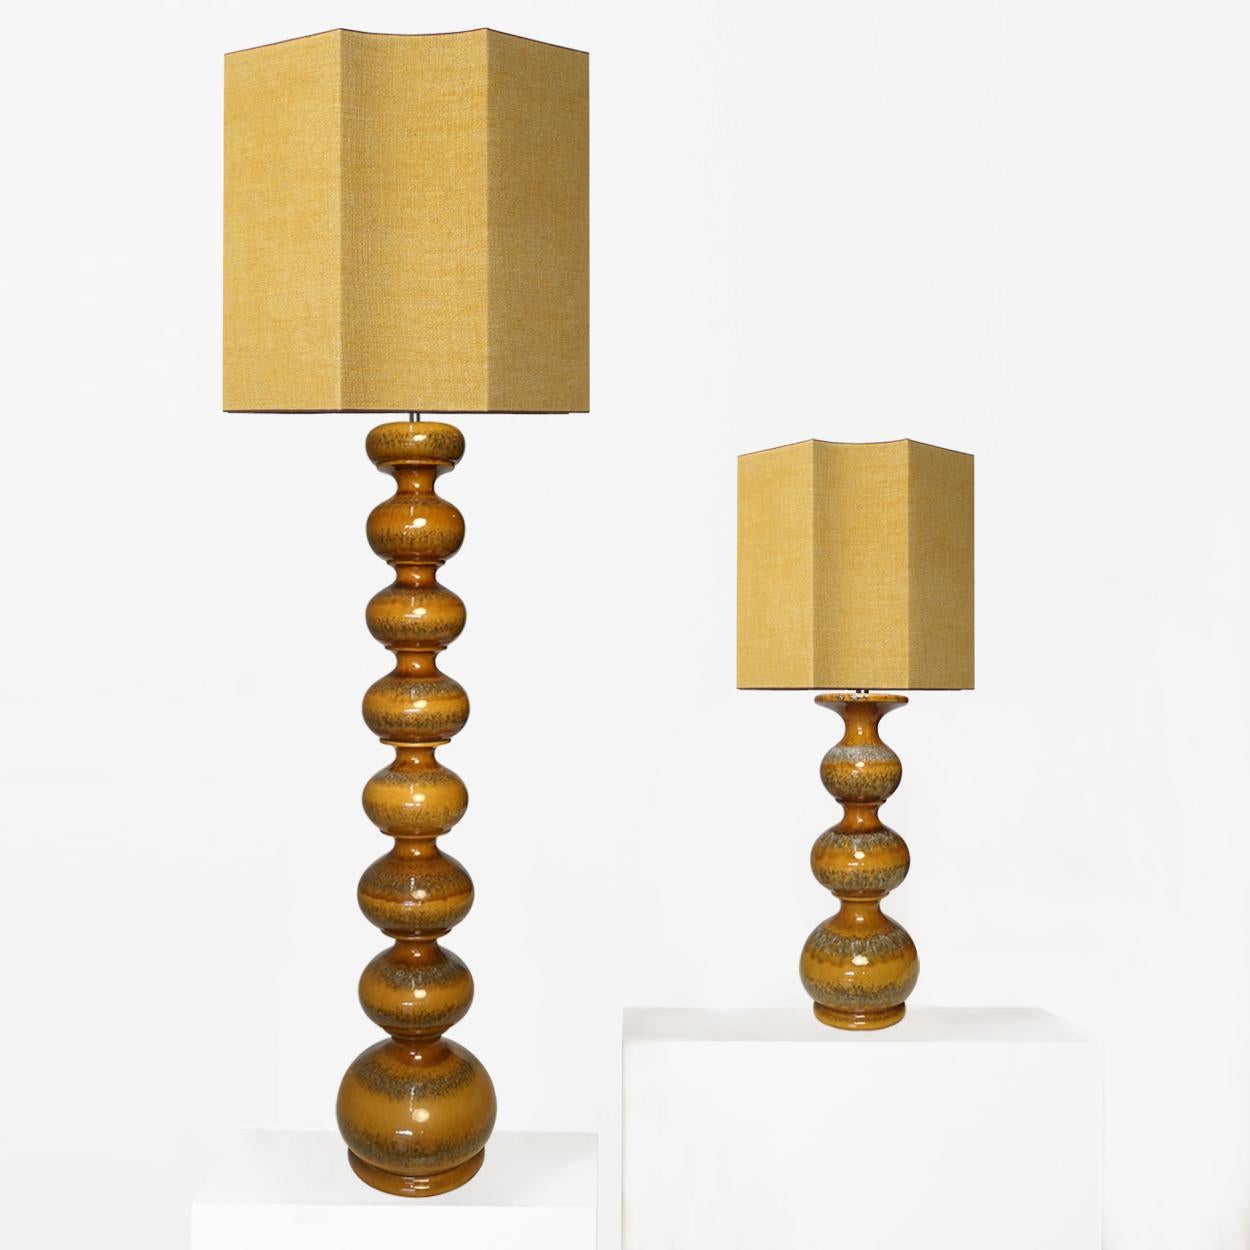 Exceptional set of ceramic bubble lamps, Germany, 1960s. Beautiful sculptural pieces made of handmade ceramic in rich glazed brown or yellow grey tones. With special new custom made warm yellow lamp shades by René Houben. With warm bronze inner